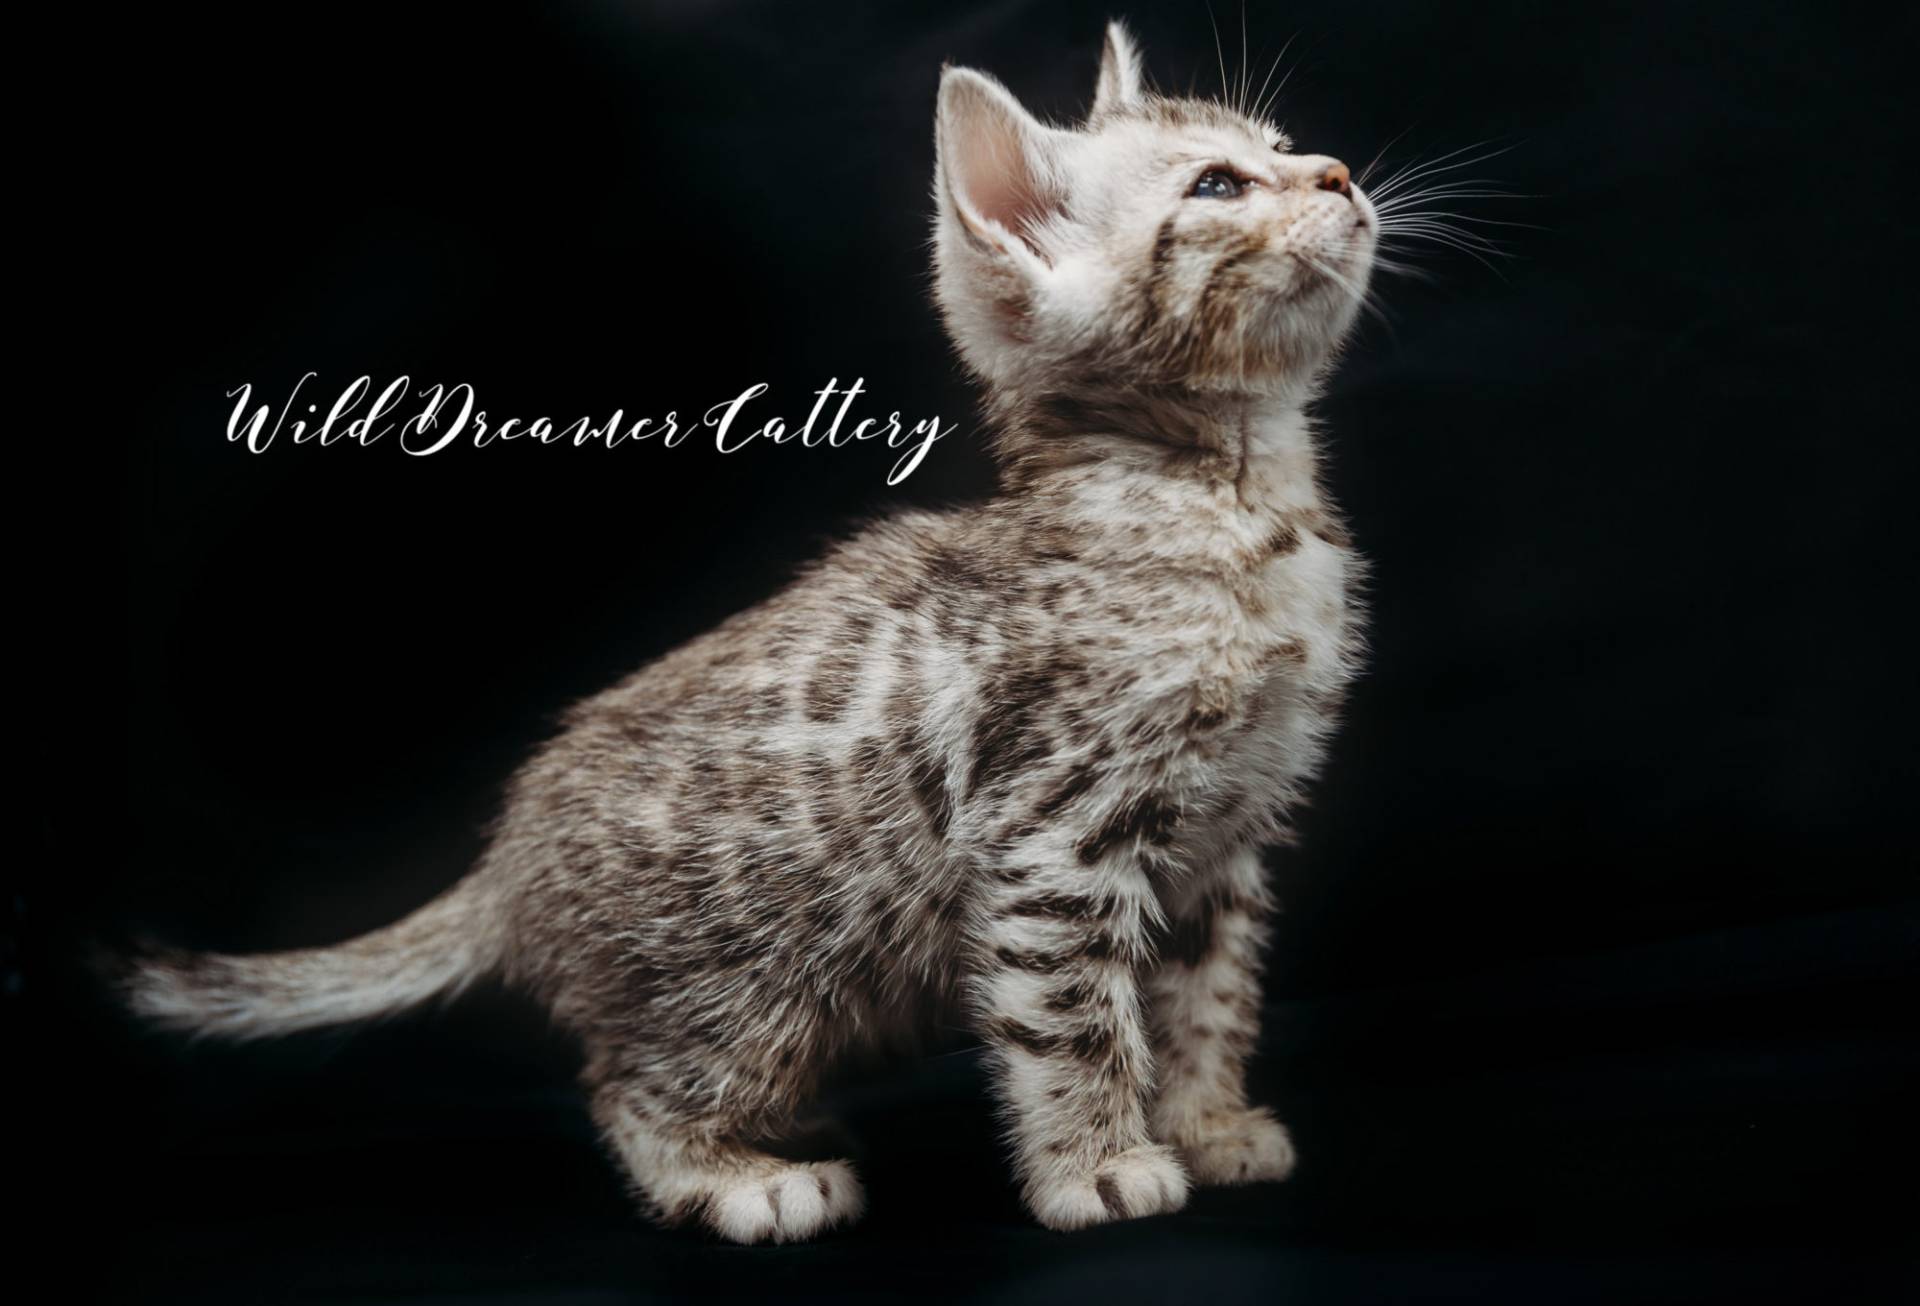 What a little silver Bengal